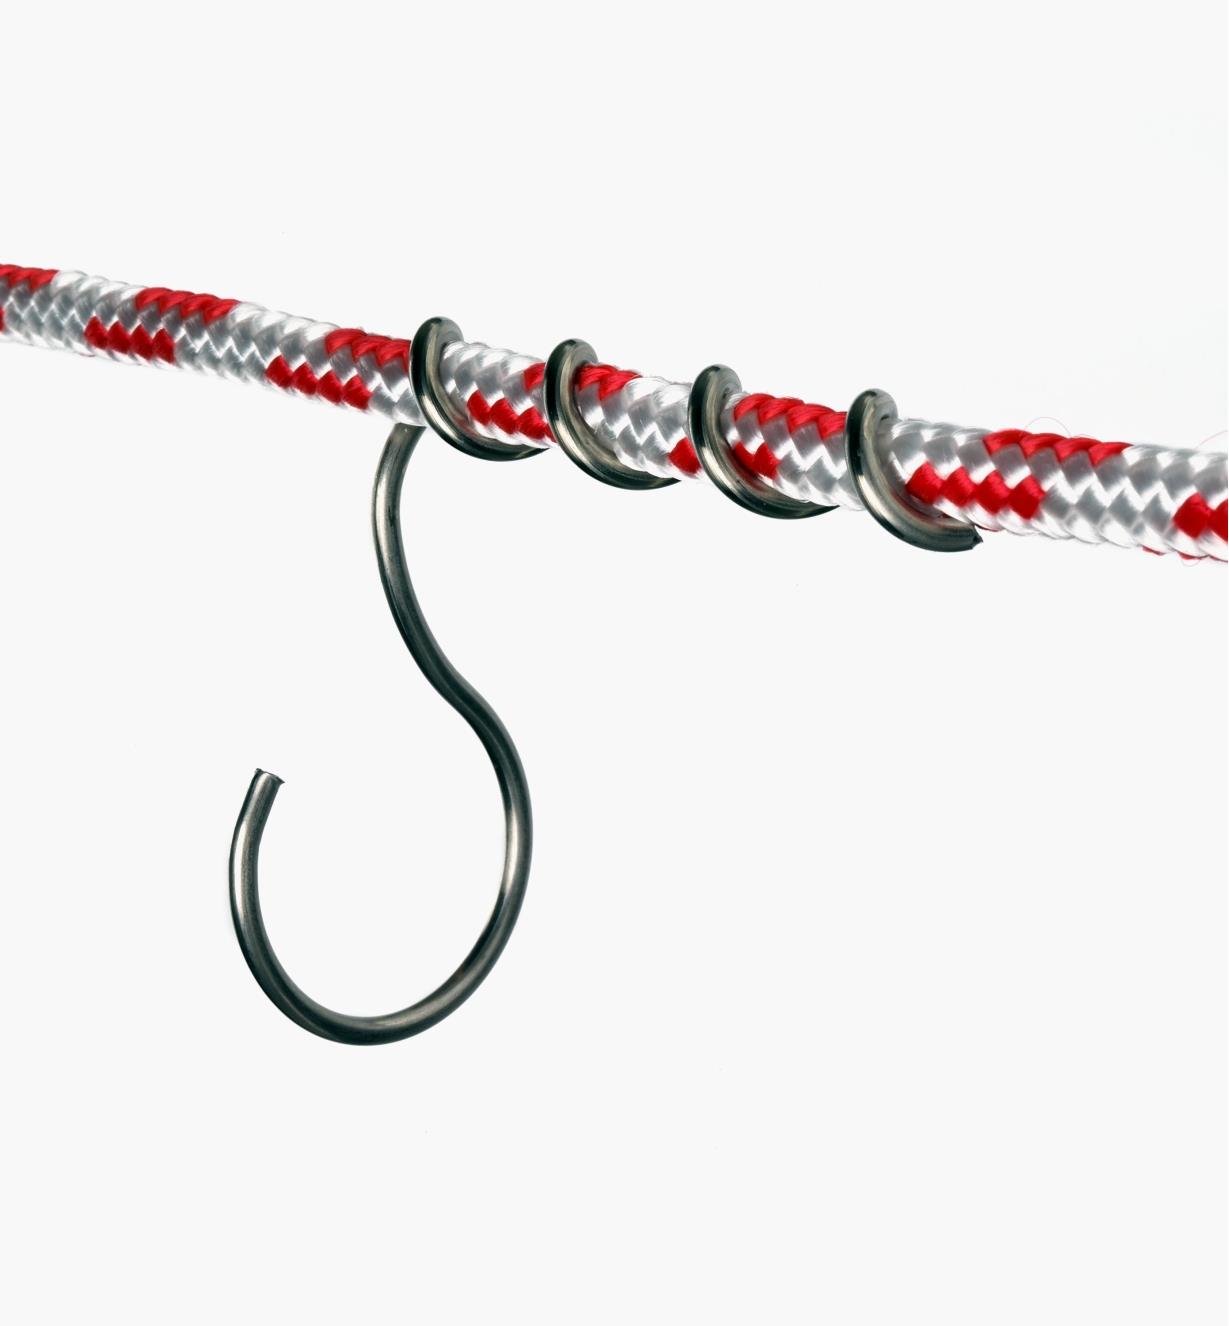 A line hook secured to a rope